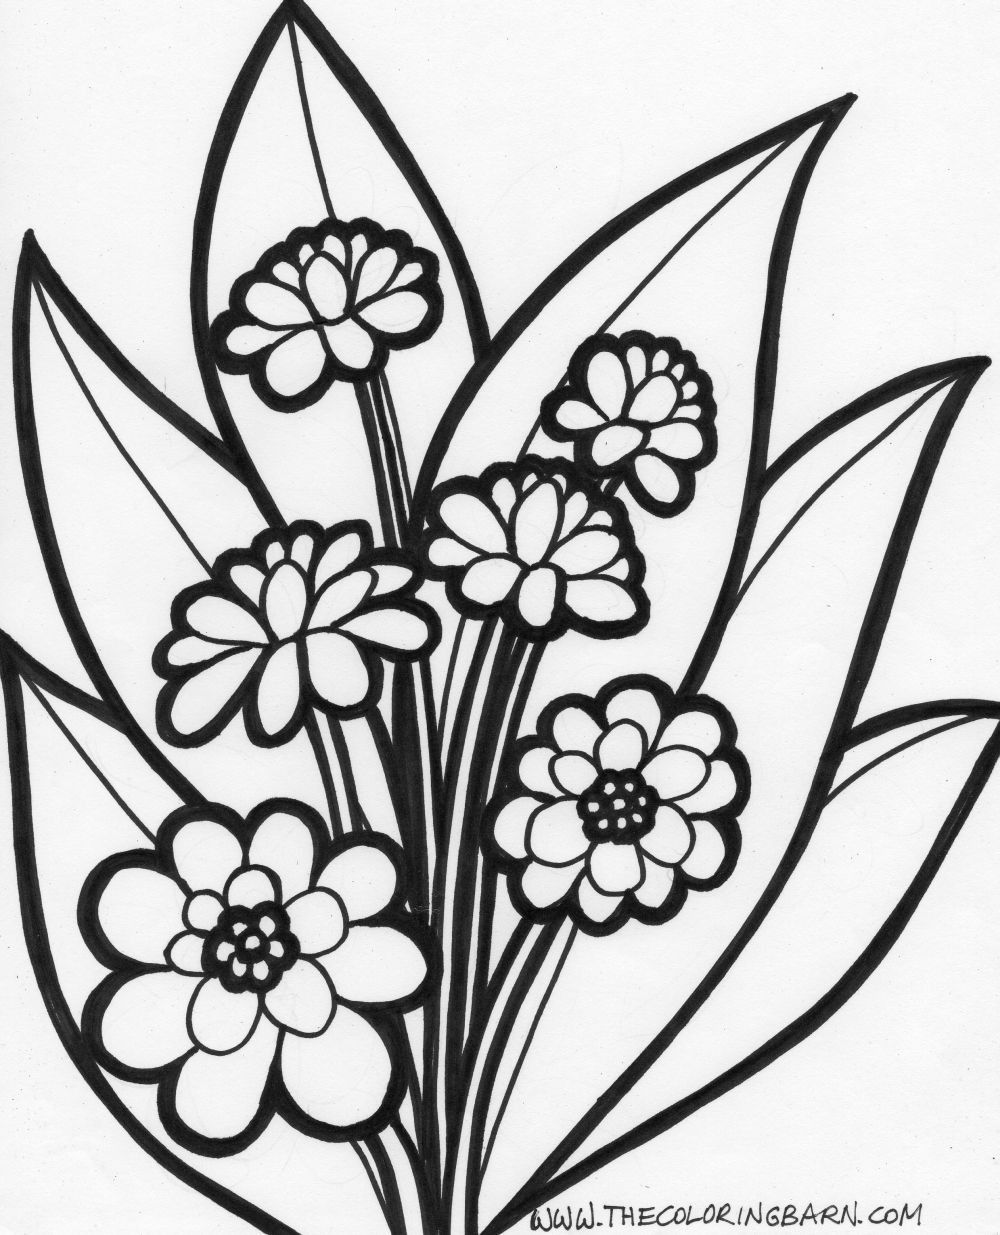 Large Flower Coloring Page com In 2020 Flower Coloring Page Printable